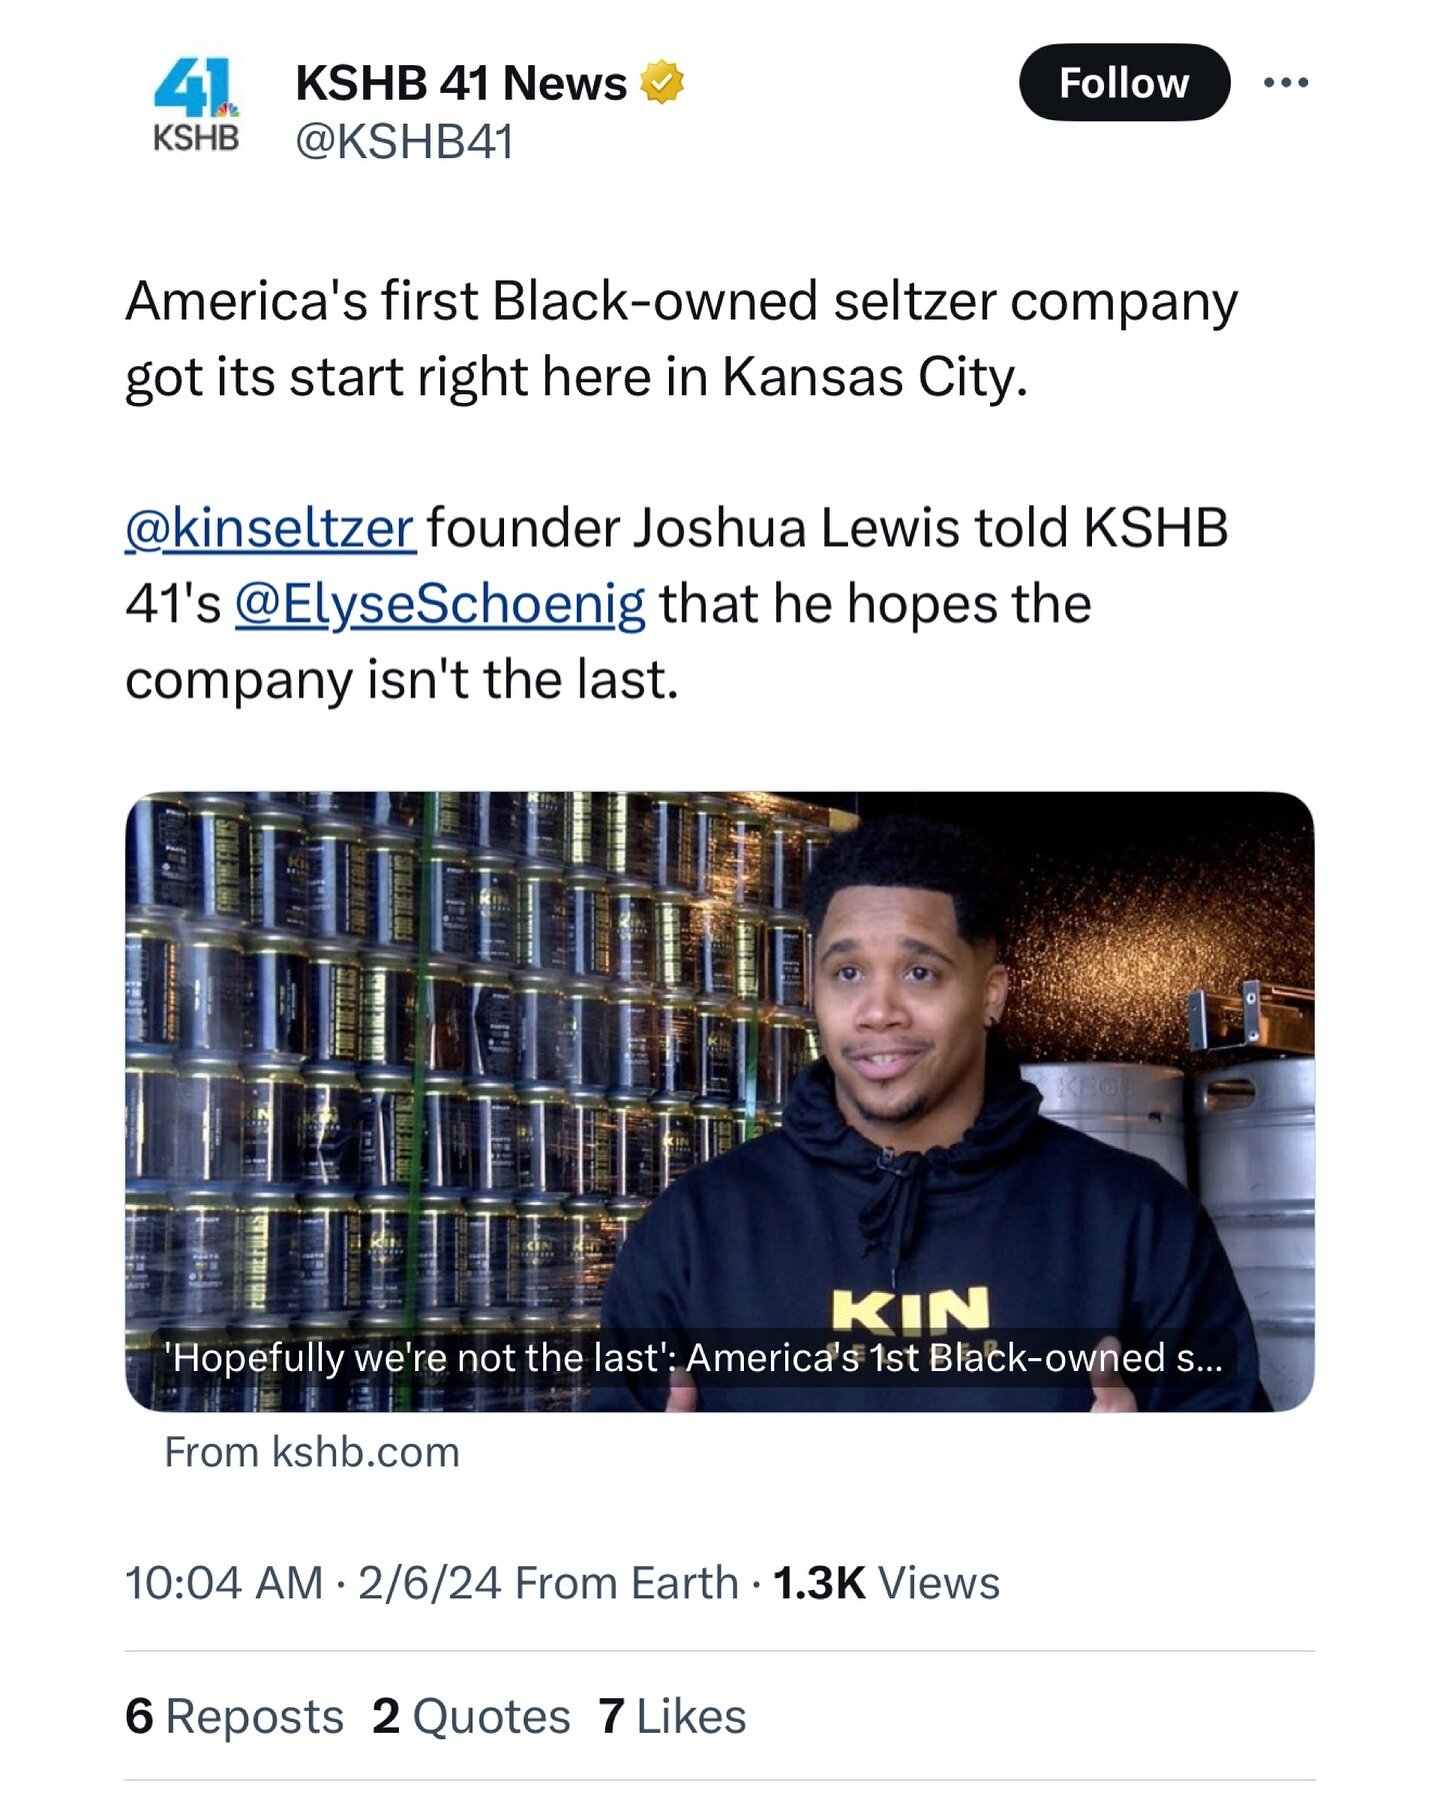 Big thanks to @theelyseschoenig at @kshb41 

We appreciate you shining the light on the story behind Kin! 

Cheers to BHM 🍻

Link to story in BIO!